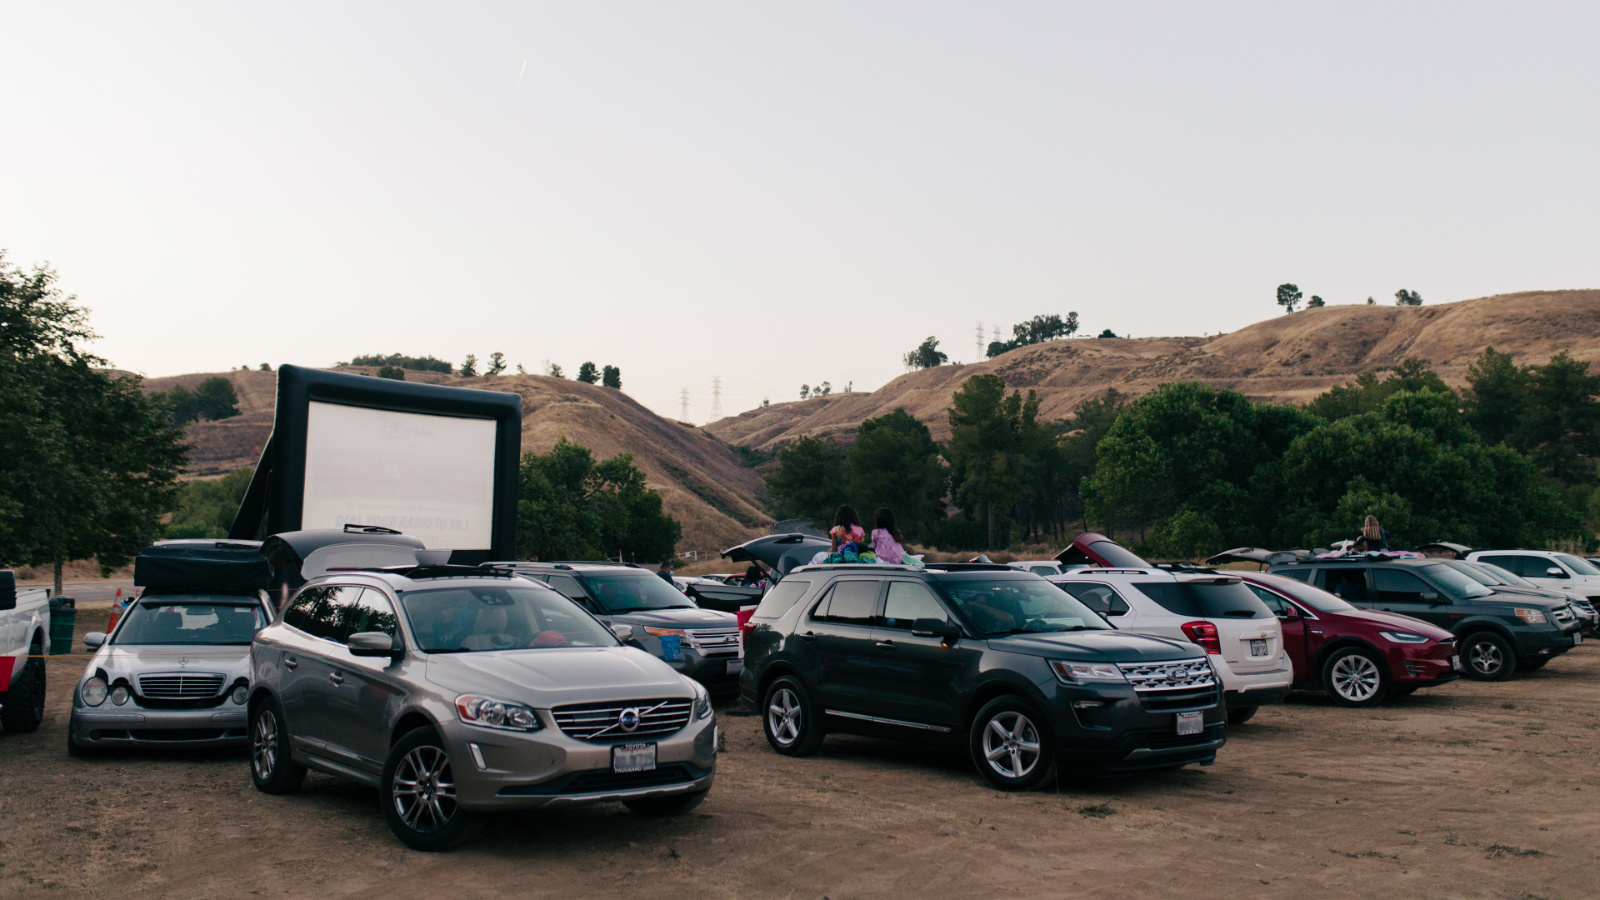 Drive In Theater Equipment Rental